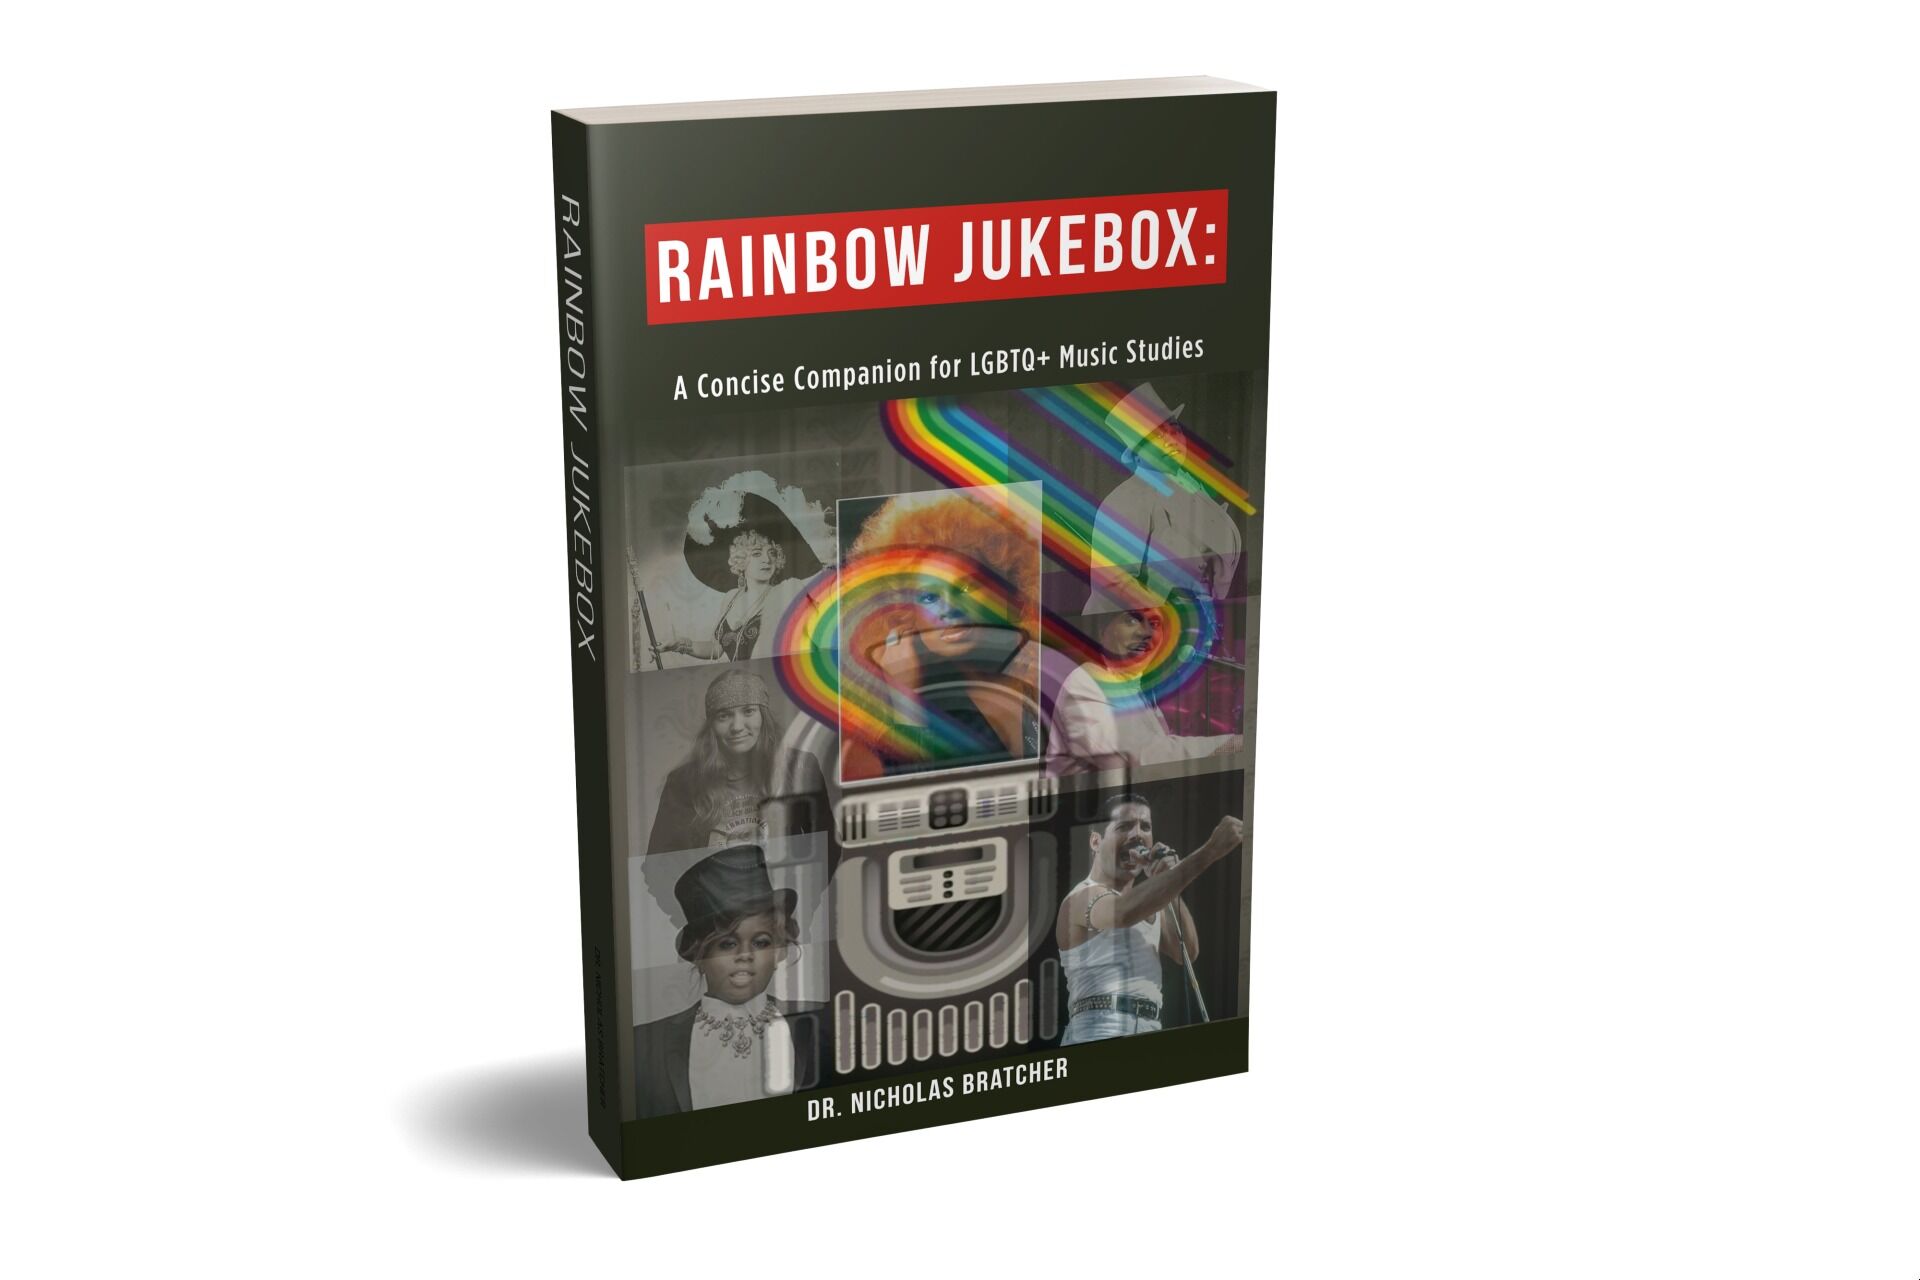 3D Mock up of book titled "Rainbow Jukebox"